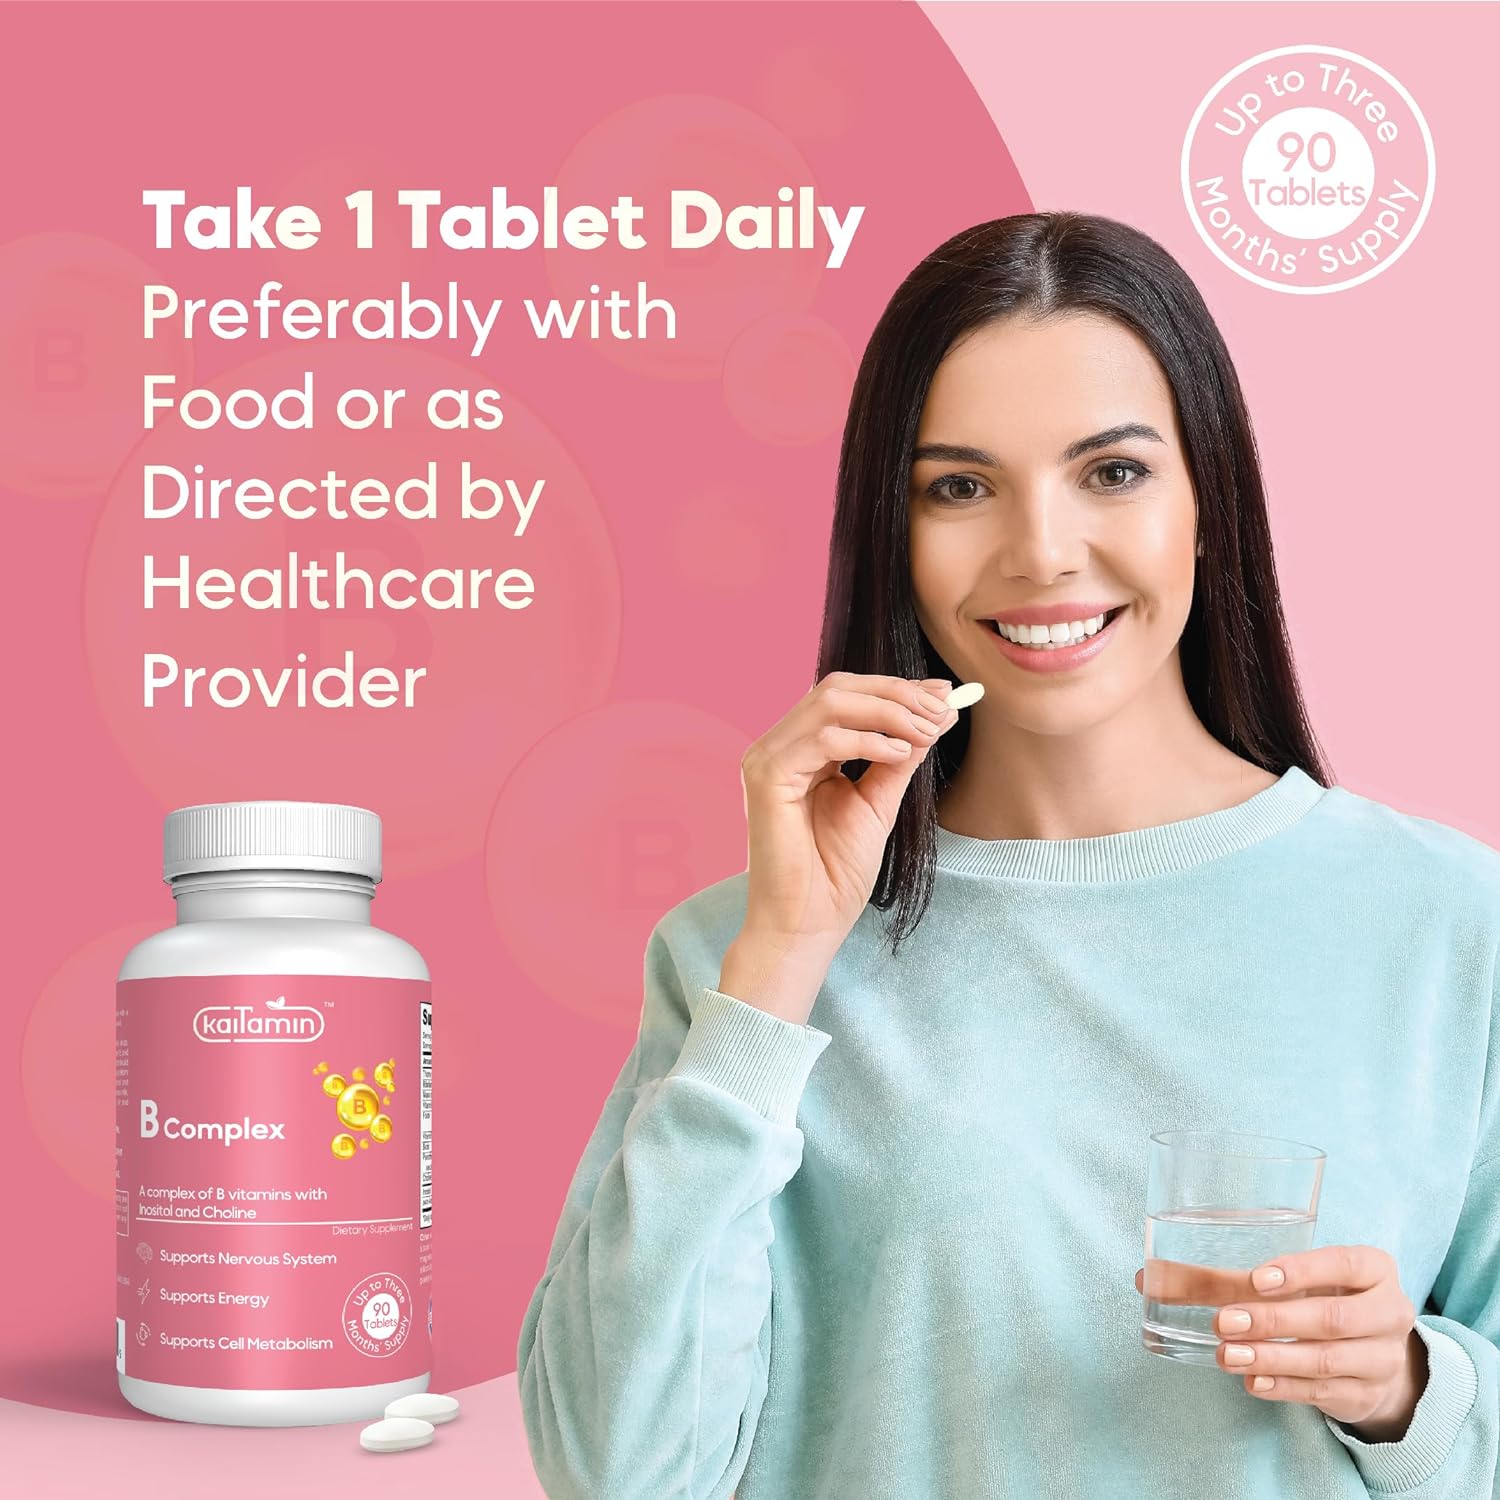 Kaitamin B Complex Vitamins for Women - One Tablet Per Day with Inositol and Choline | Supports PCOS, Energy, Metabolism, Memory, Mood - Genetic Expression, Hormone Production - 3 Months' Supply : Health & Household